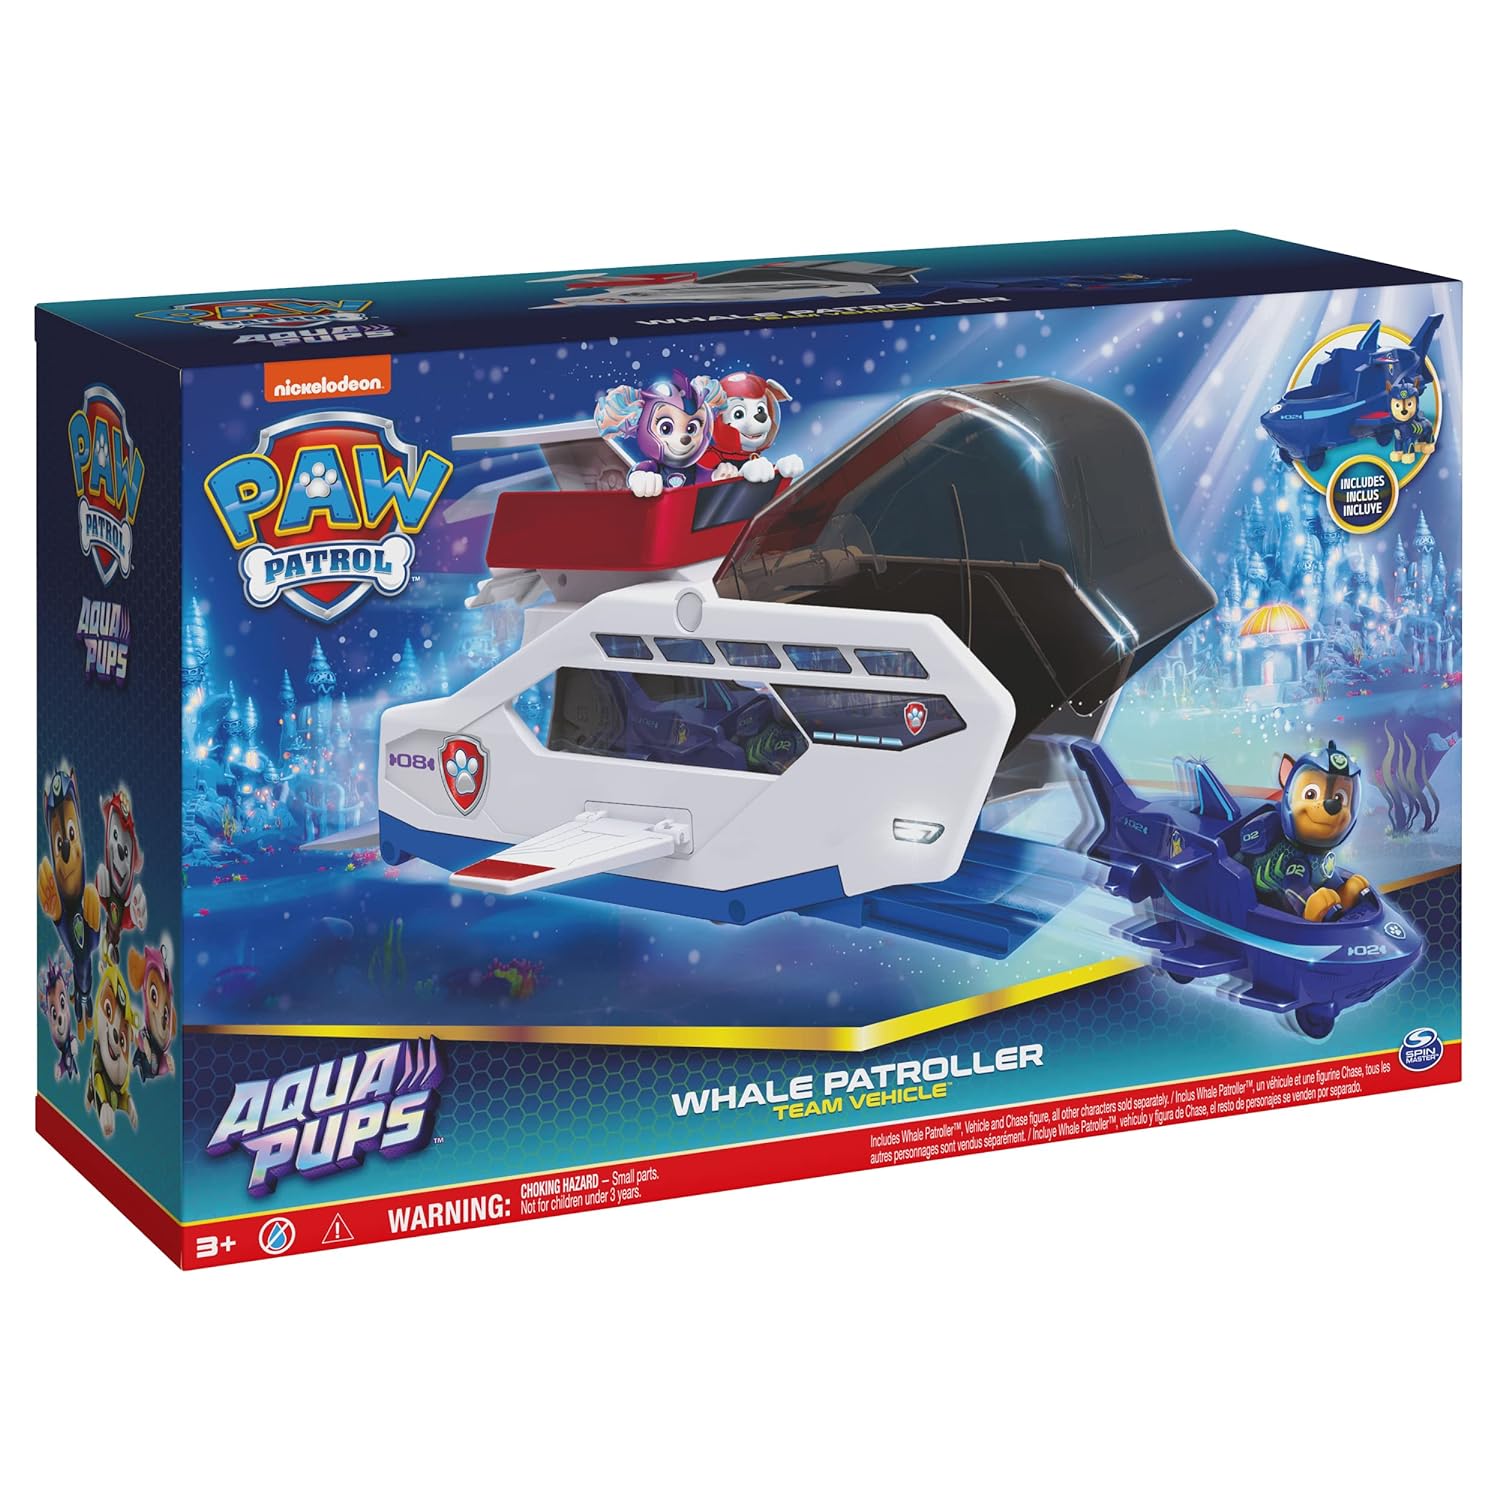 Winmagic Paw Patrol Aqua Pups Whale Patroller Team Vehicle With Chase Action Figure, Toy